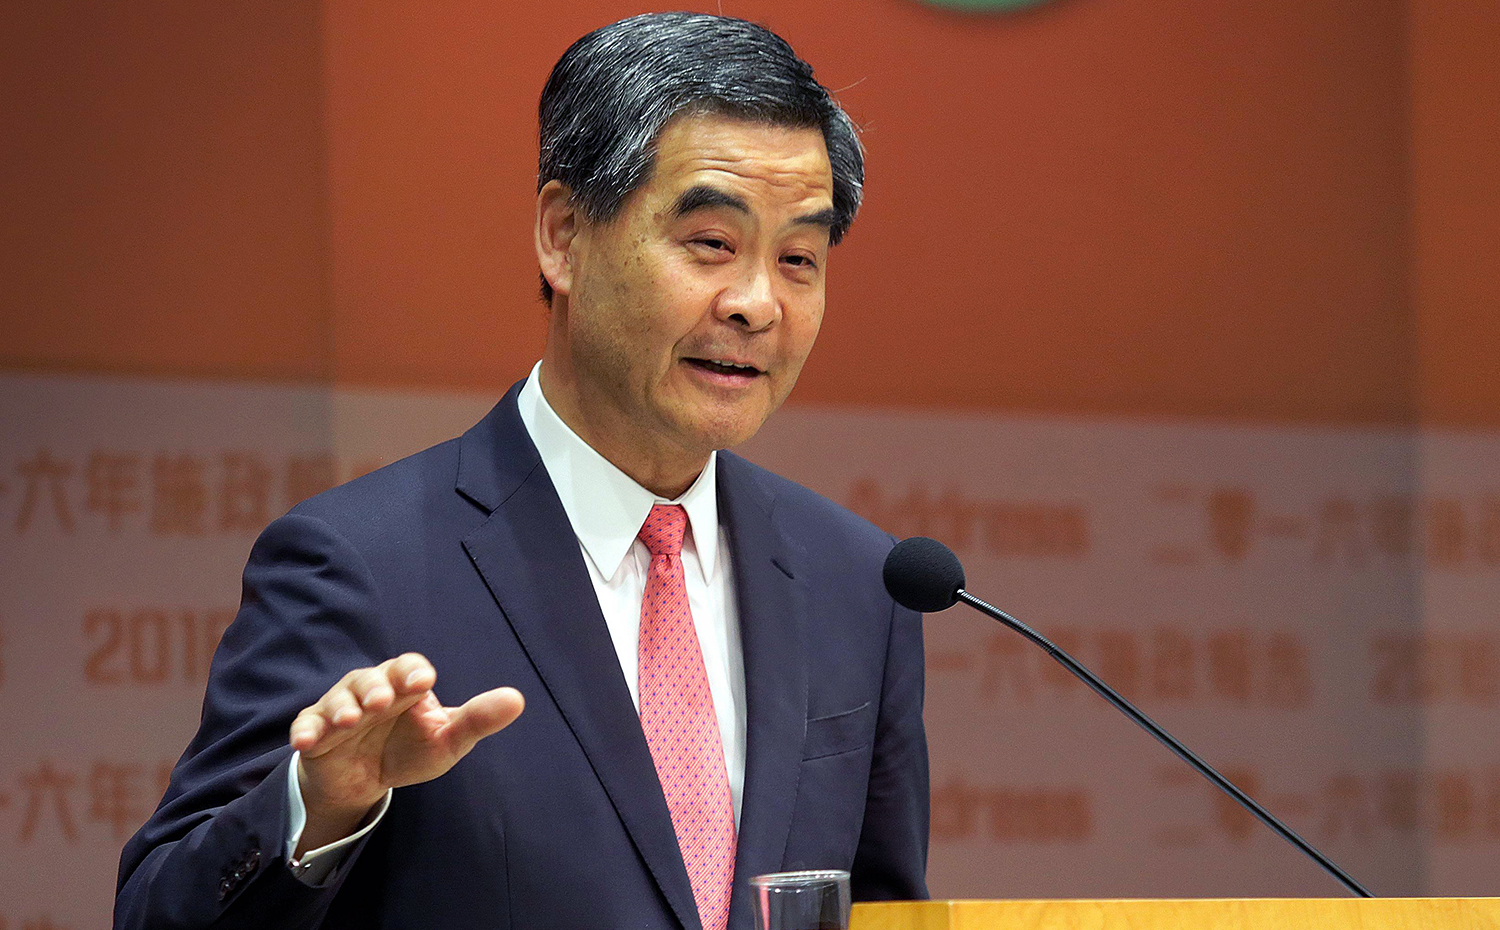 Hong Kong's Chief Executive Leung Chun-ying speaks to the media at a press conference after delivering his 2016 Policy Address to the Legislative Council in the Admiralty district of Hong Kong on January 13, 2016. During his earlier policy address, Leung warned of "obstacles" ahead for the city's economy amid a global economic slowdown, triggered by tumult in China, that hit Hong Kong's trade sector last year. AFP PHOTO / ISAAC LAWRENCE